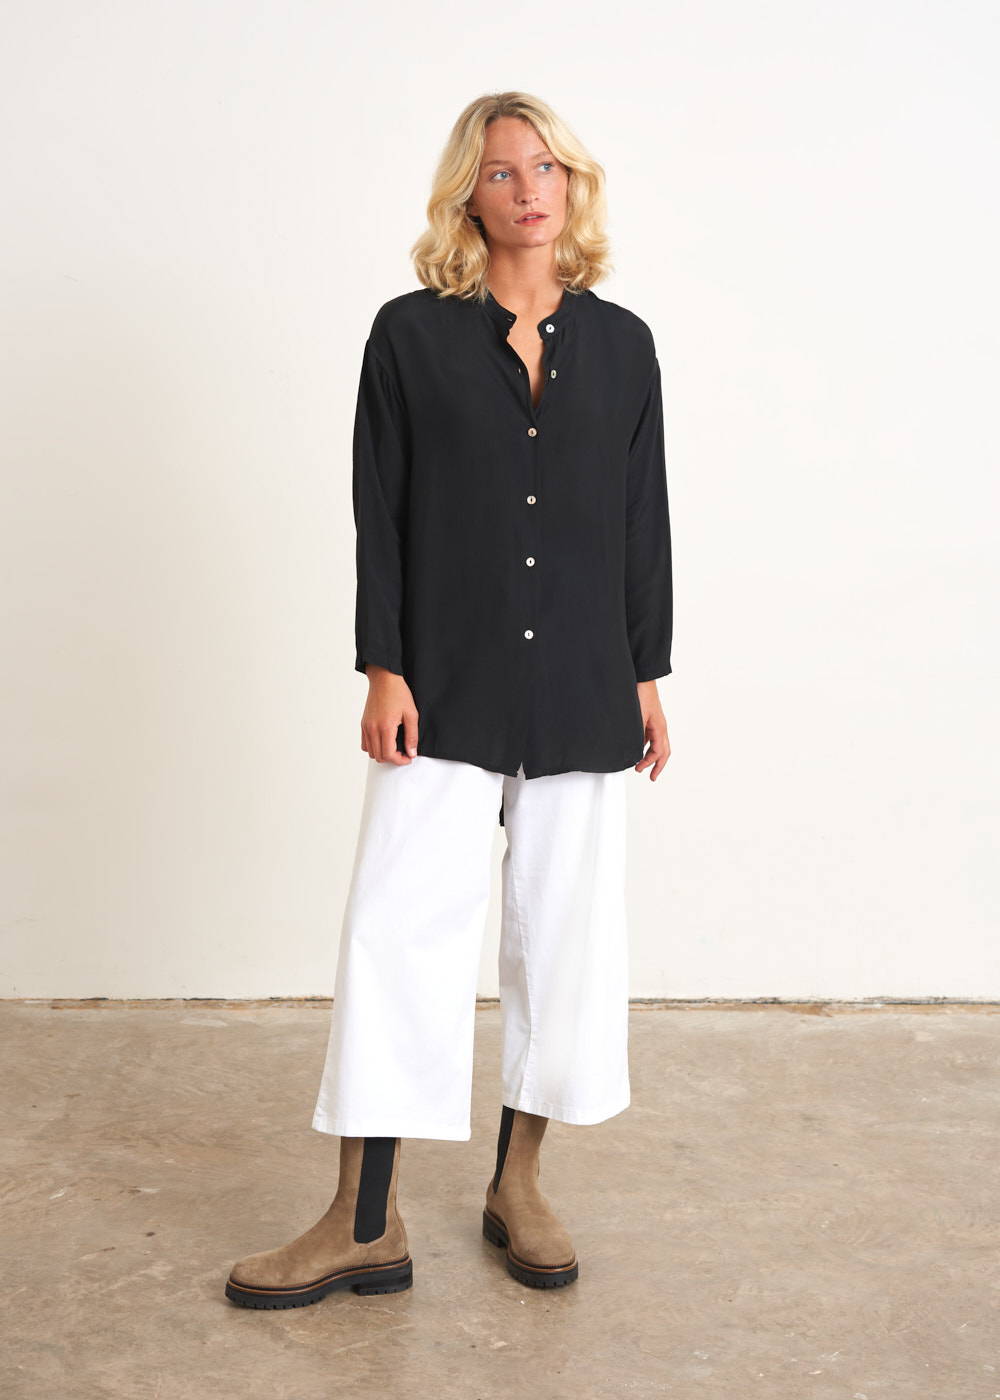 A model wearing a black oversized shirt with mother of pearl buttons over white culottes and taupe chelsea boots